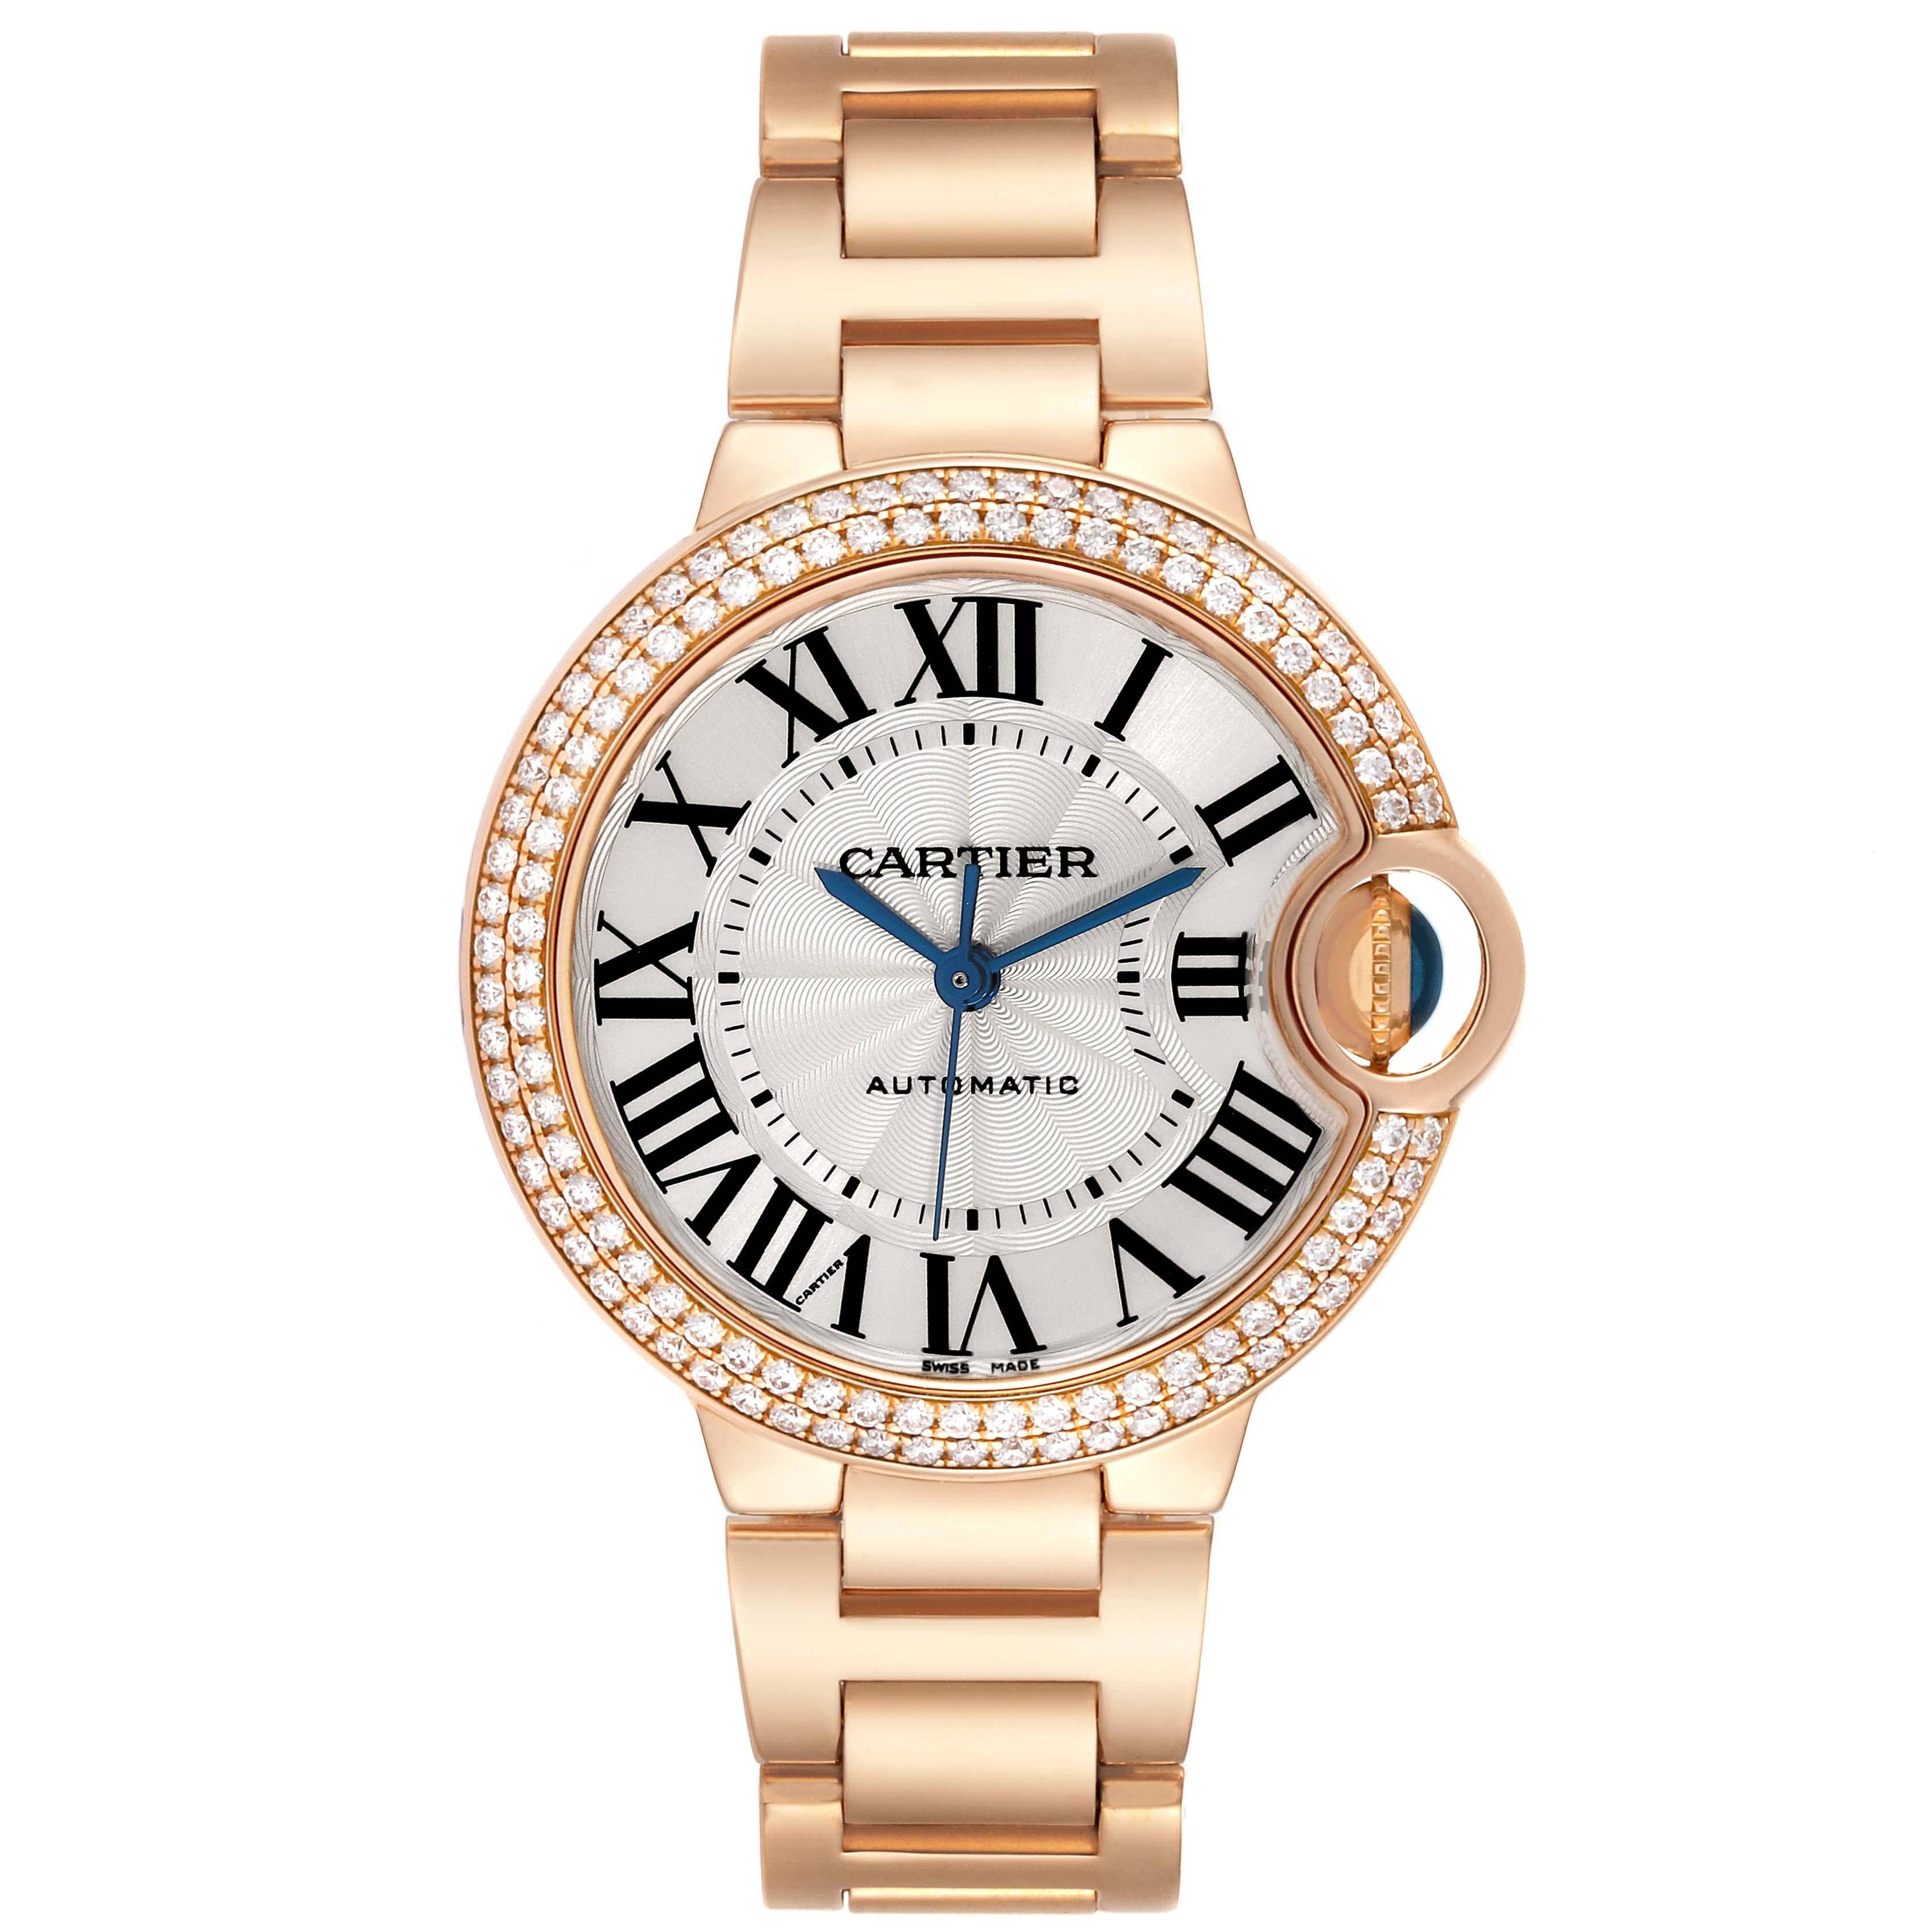 Cartier Ballon Bleu Automatic Rose Gold Diamond Ladies Watch WE902034 Papers. Automatic self-winding movement. 18K rose gold case 33 mm in diameter. Fluted crown set with the blue sapphire cabochon. 18K rose gold original Cartier factory double row